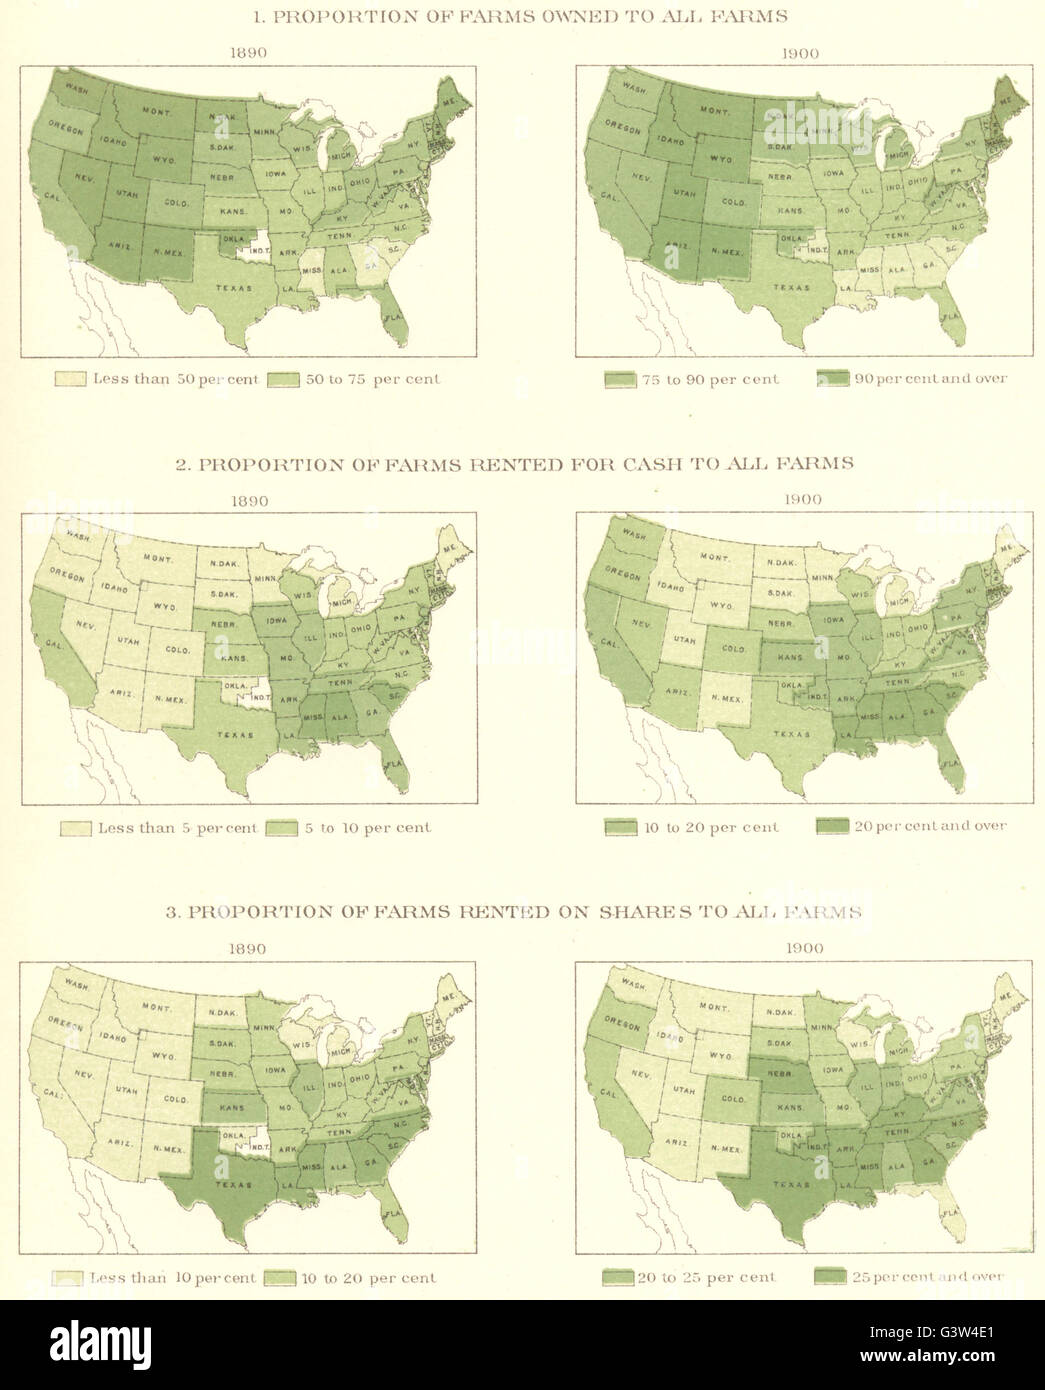 USA: Proportion of farms owned rented , 1900 antique map Stock Photo